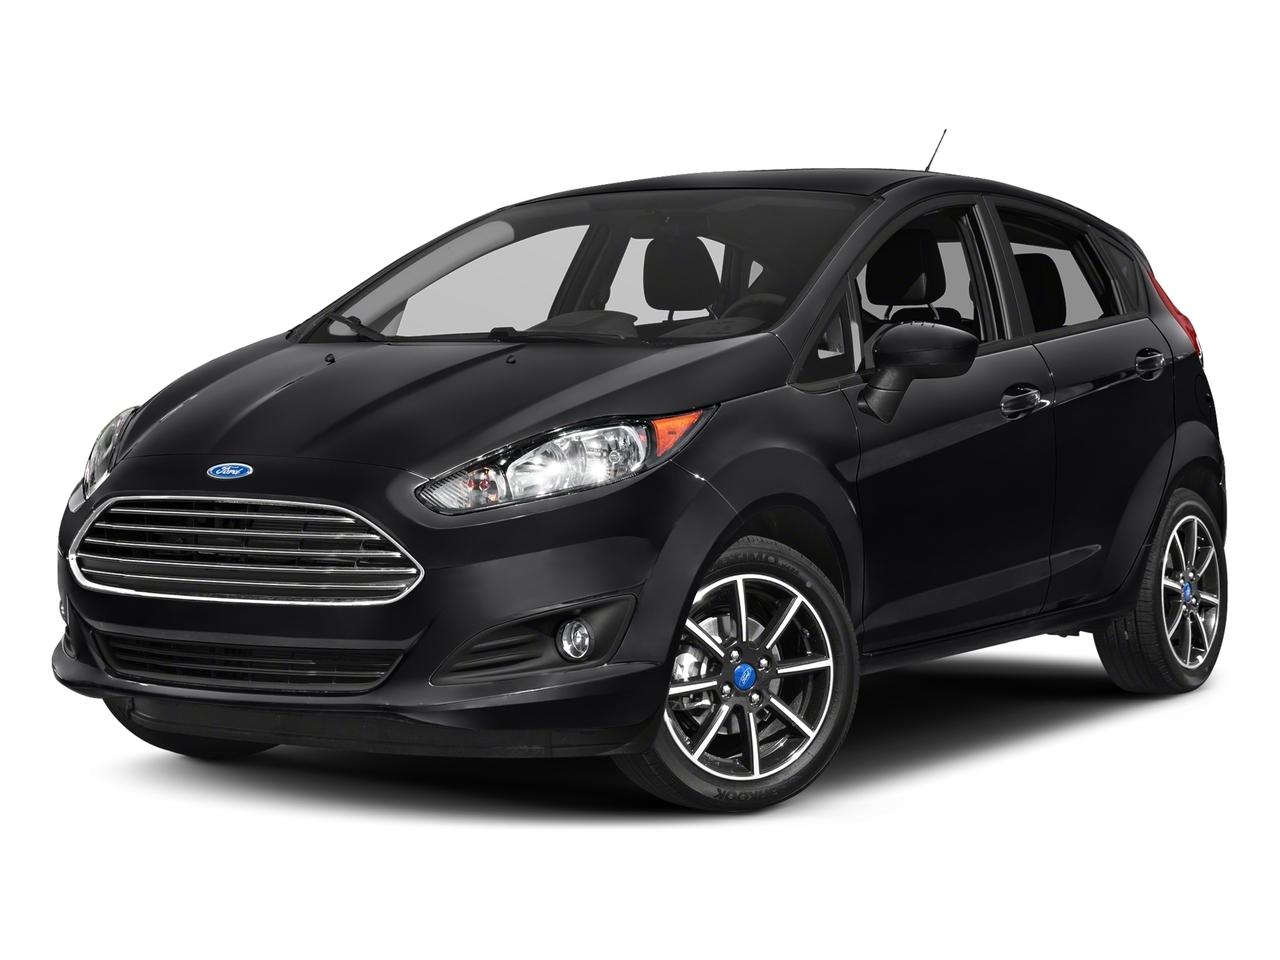 2017 Ford Fiesta Vehicle Photo in Marion, IA 52302